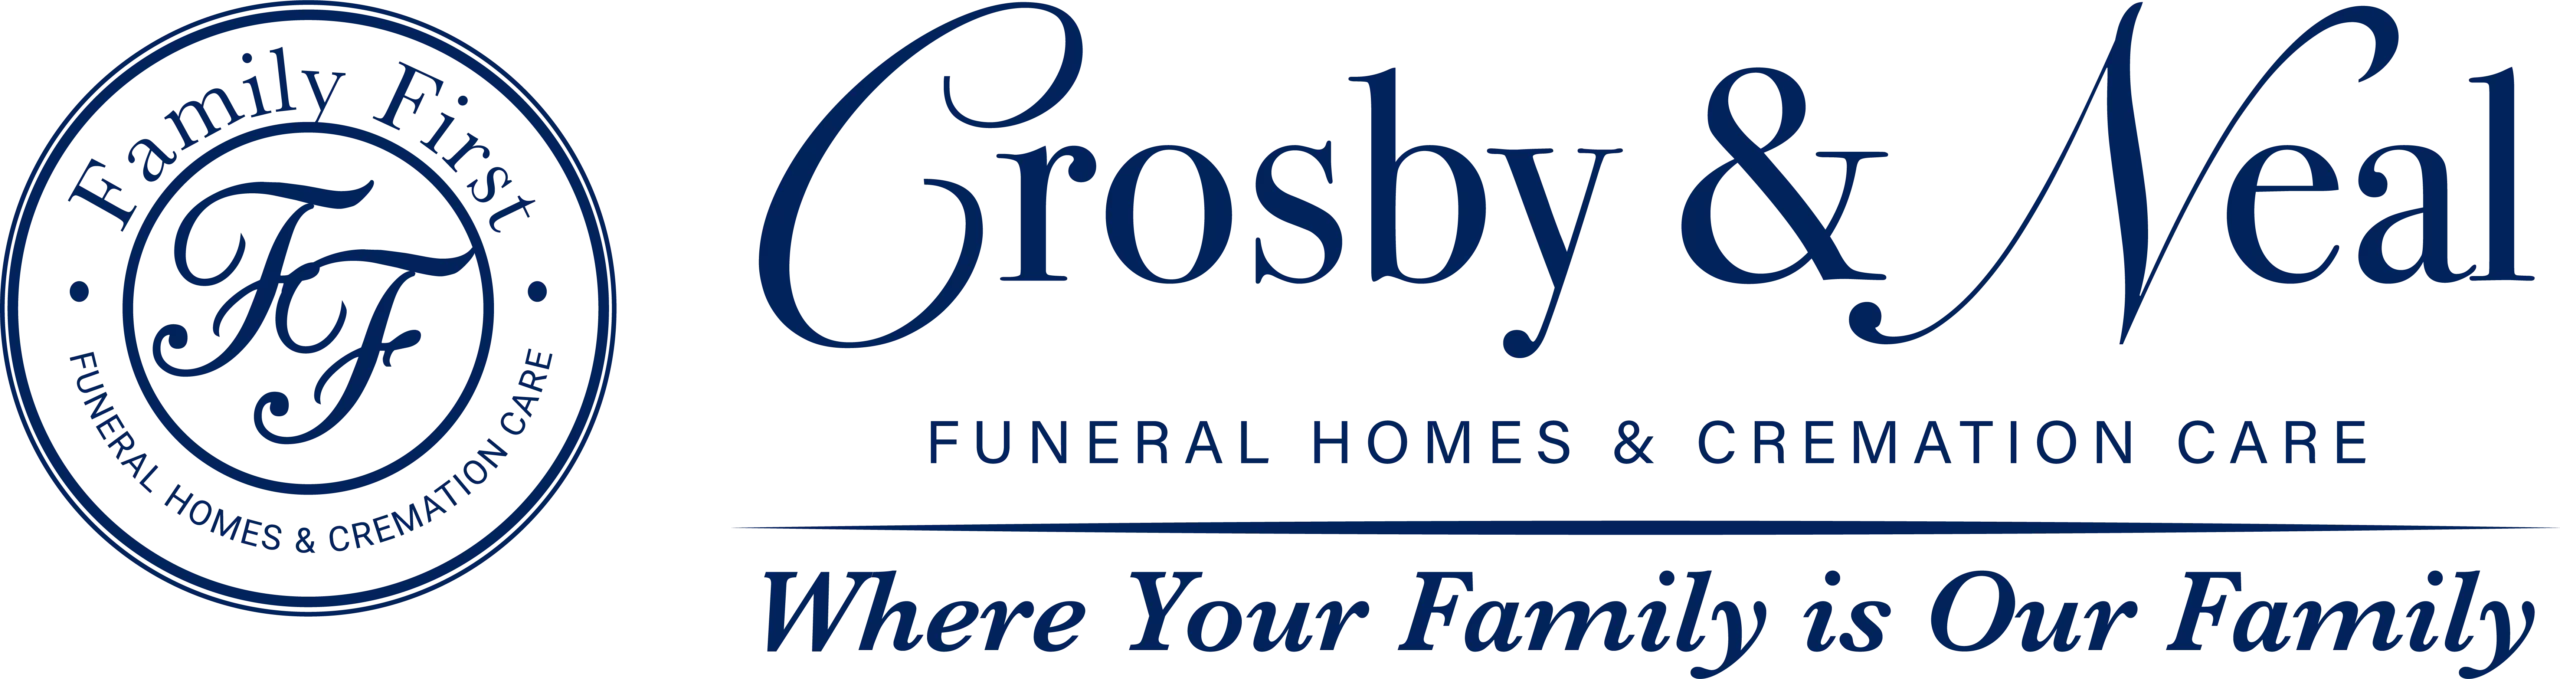 CROSBY & NEAL FUNERAL HOME